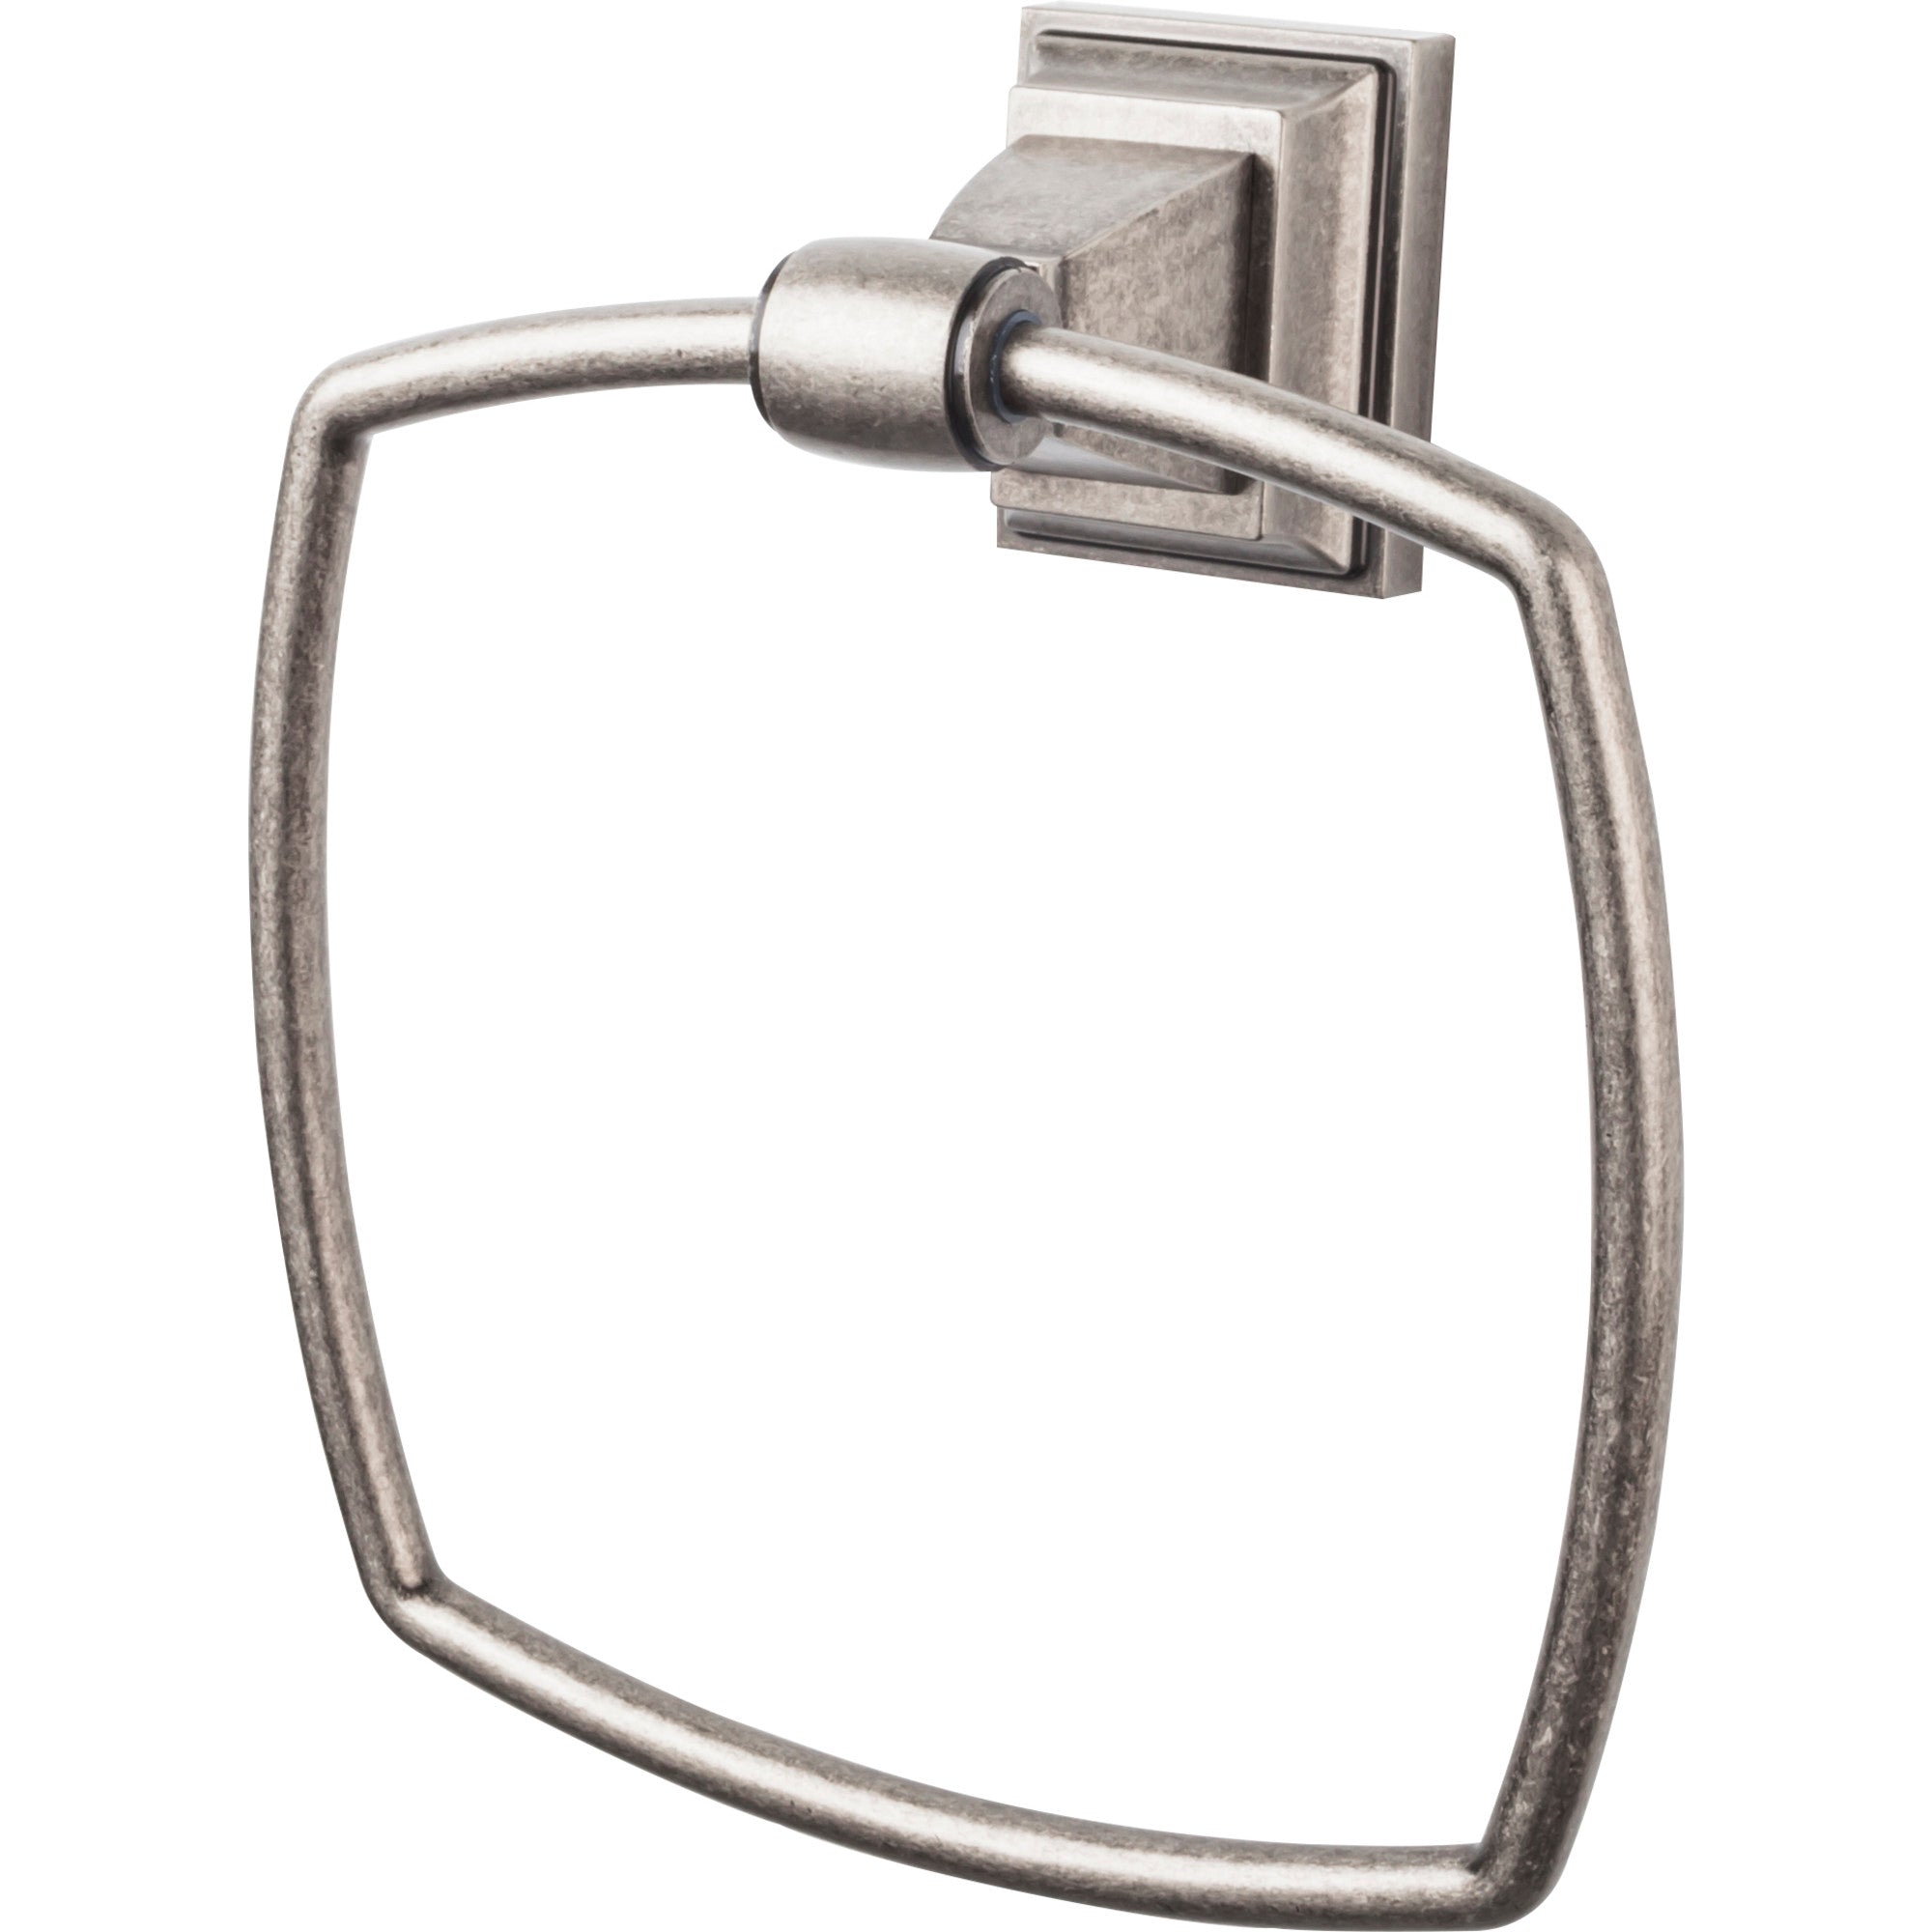 Top Knobs - Hardware - Stratton Bath Ring - Polished Nickel - Union Lighting Luminaires Décor